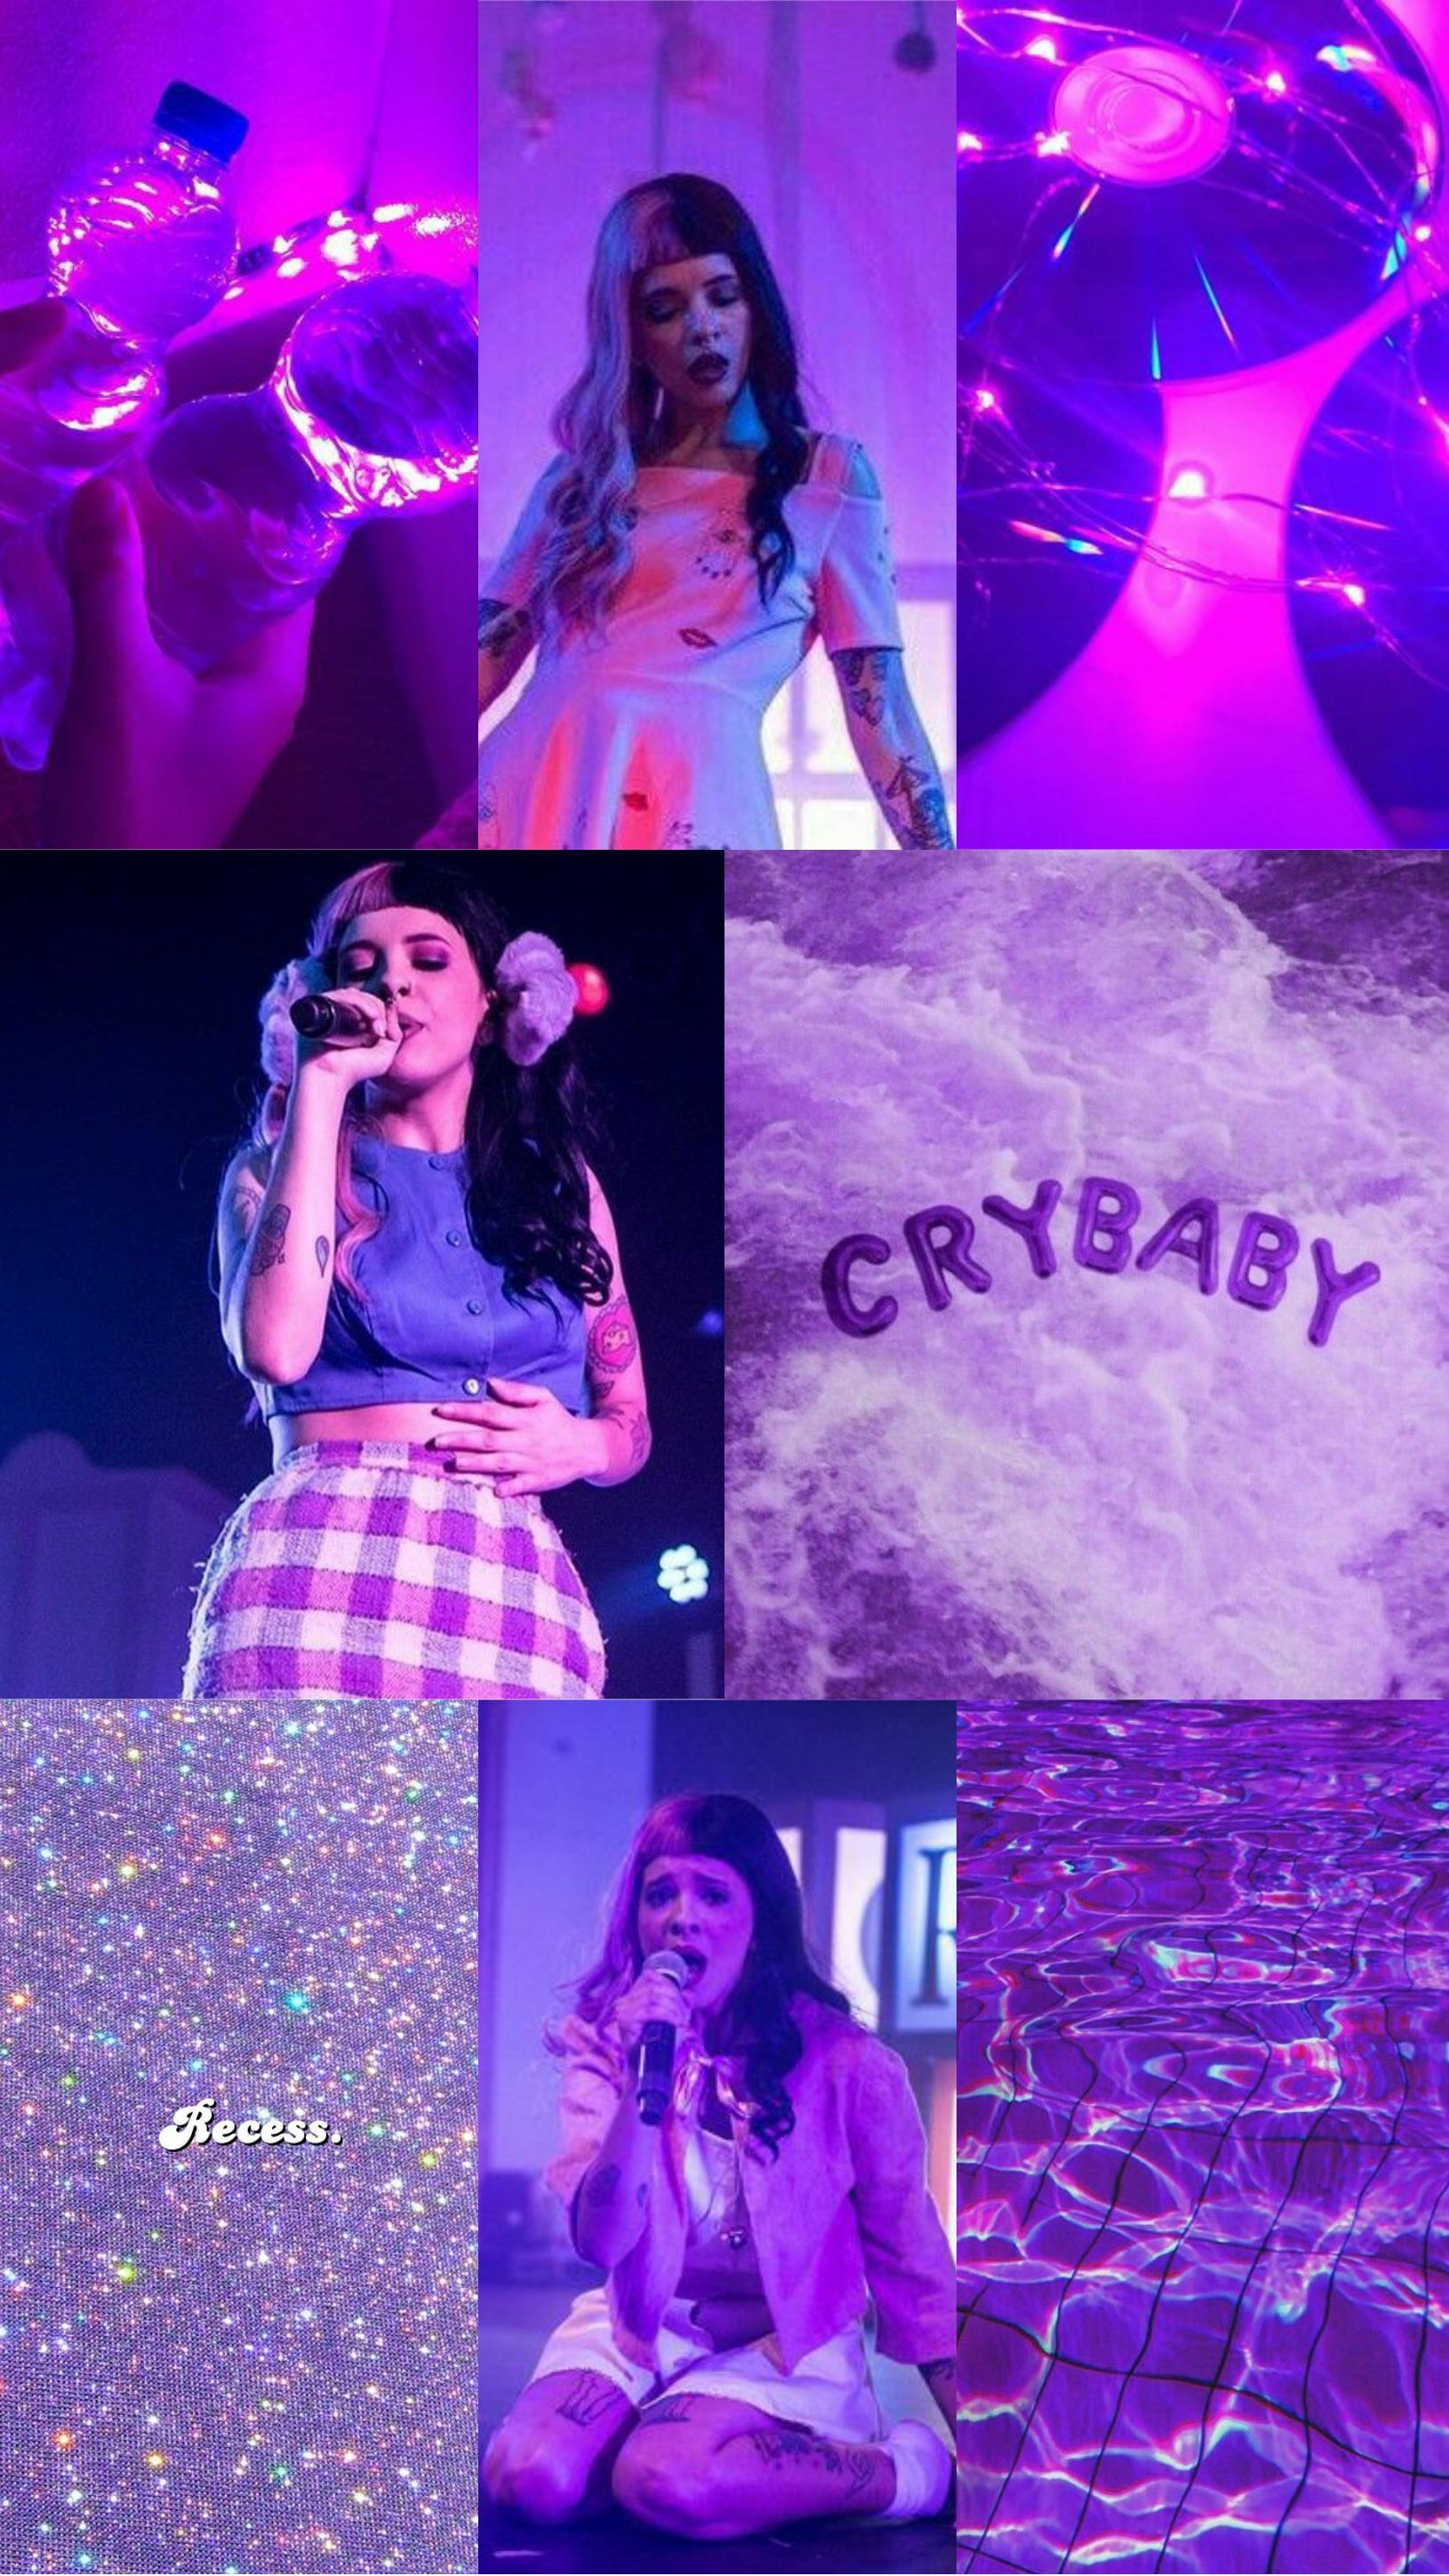 Melanie Wallpaper Background For Ur Phone In Purple ✨a E S T H E T I C✨ I Made :)